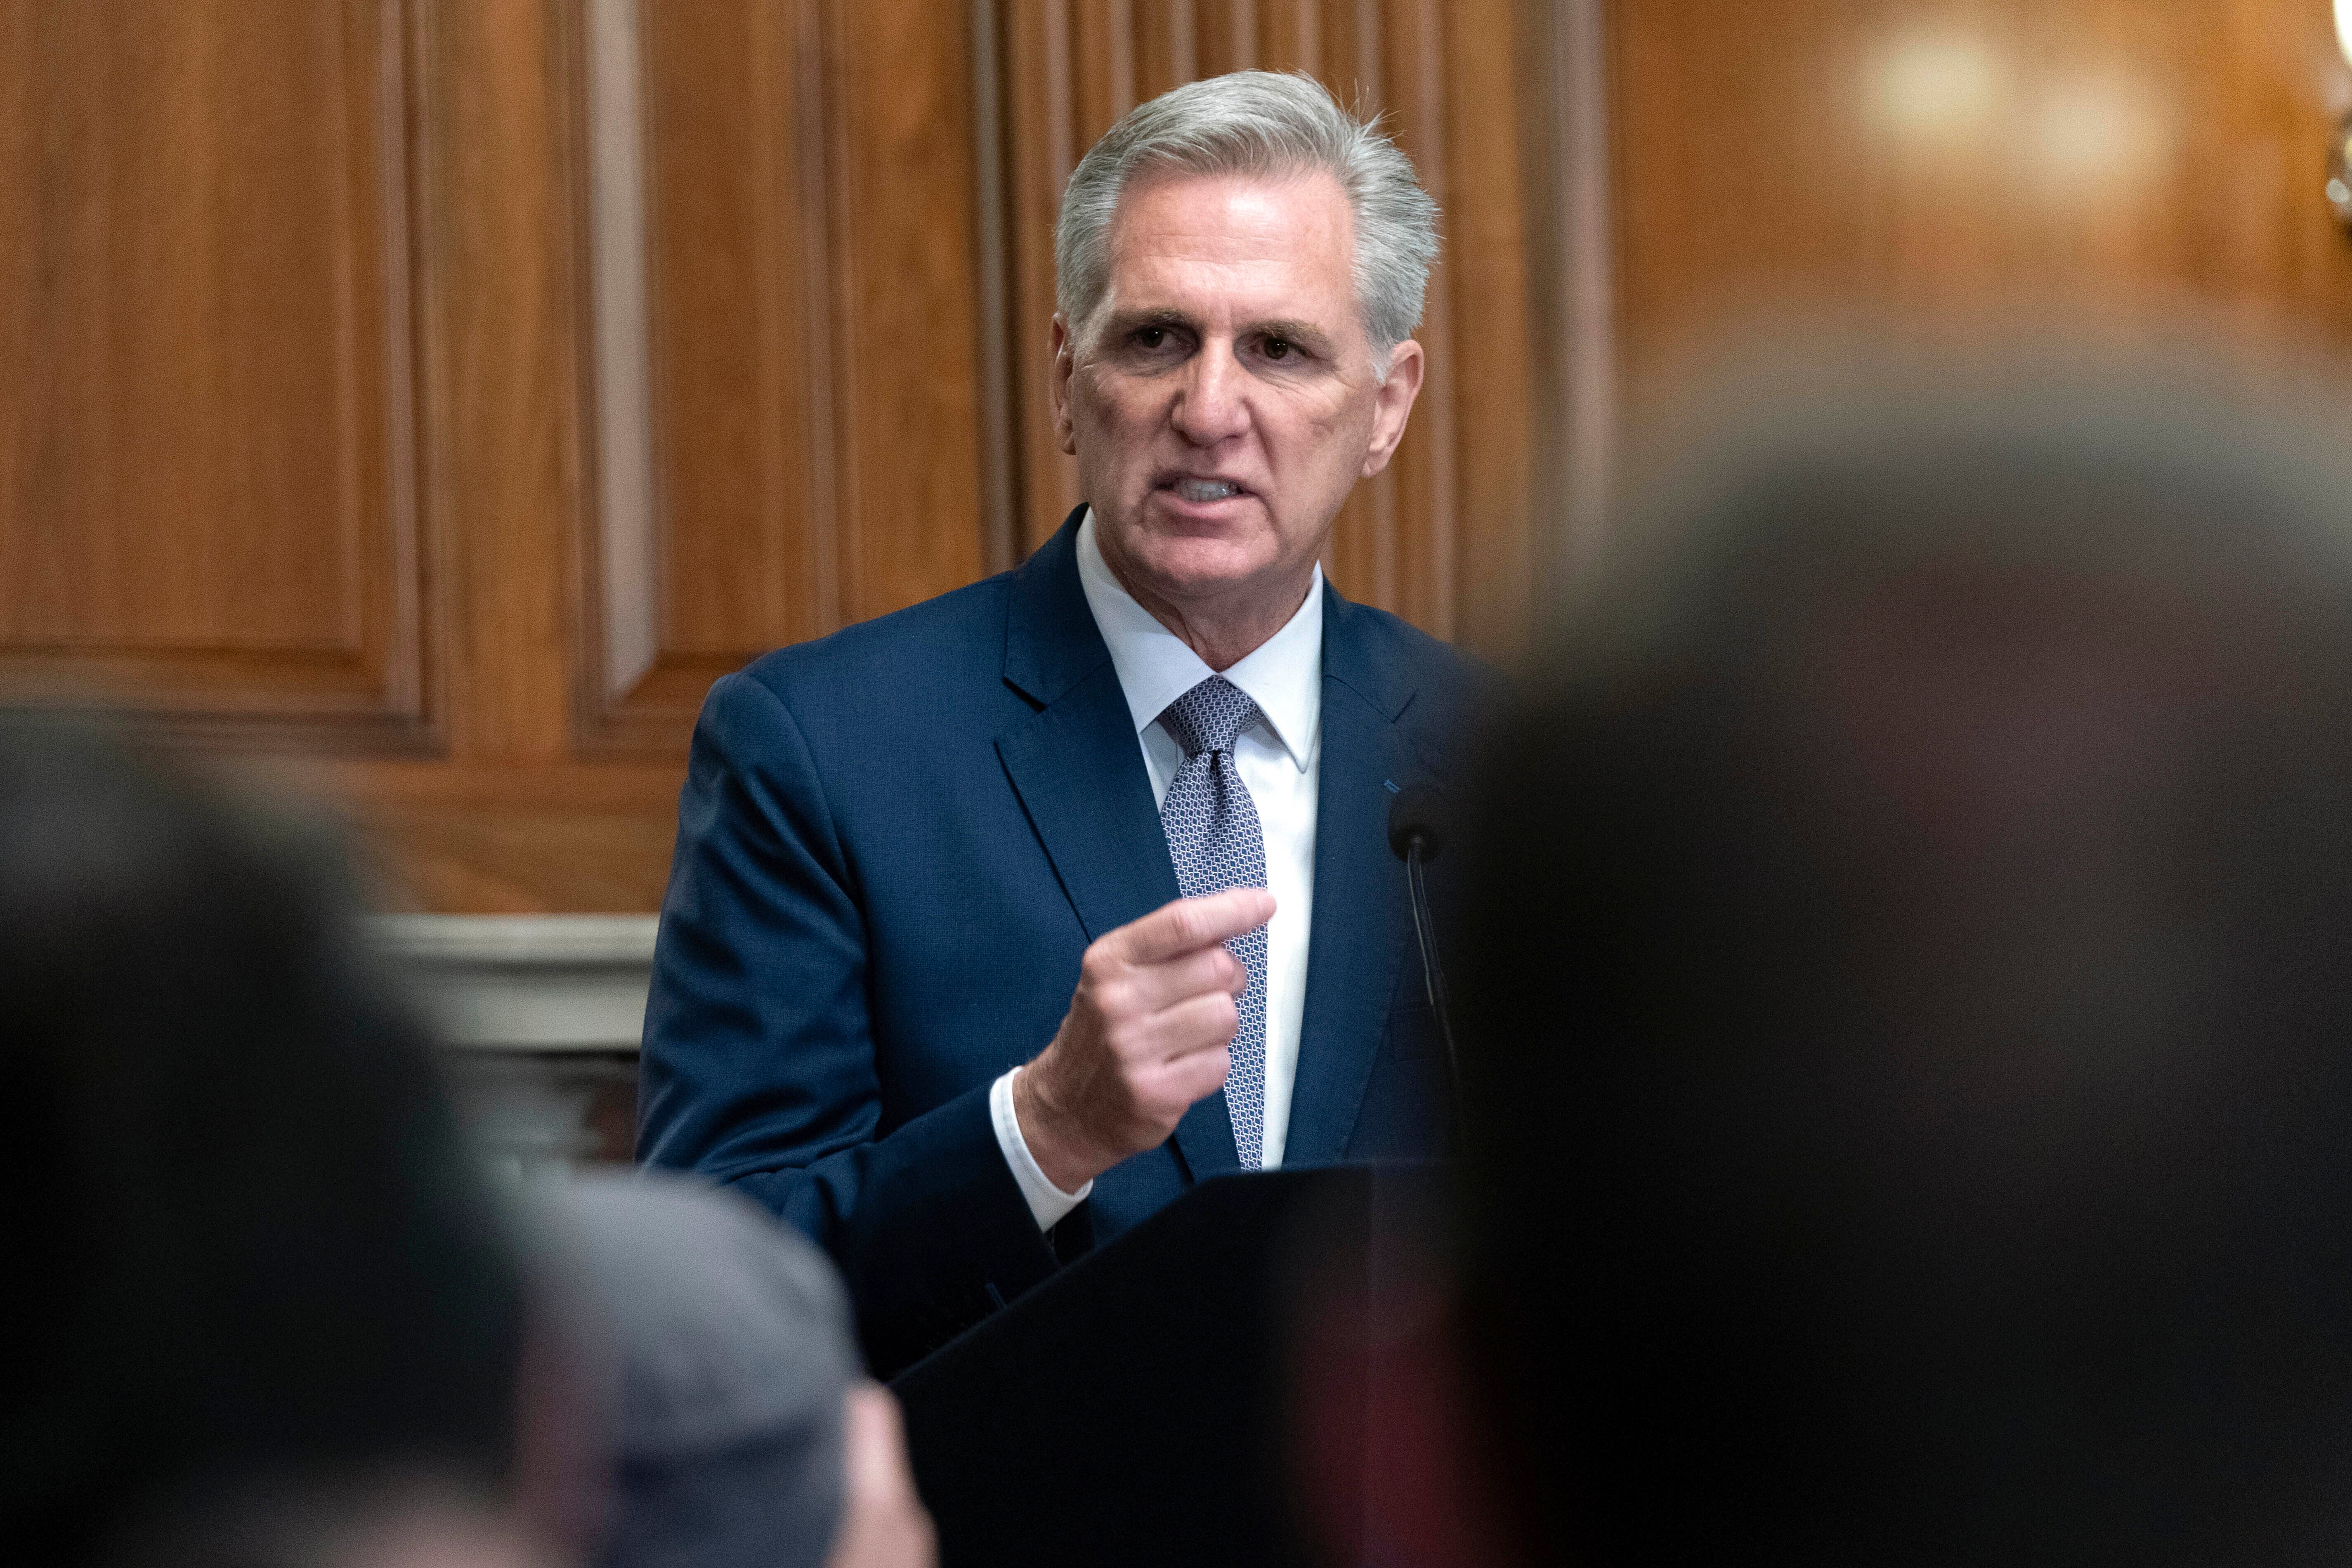 Kevin McCarthy is giving indications he may want his old job back